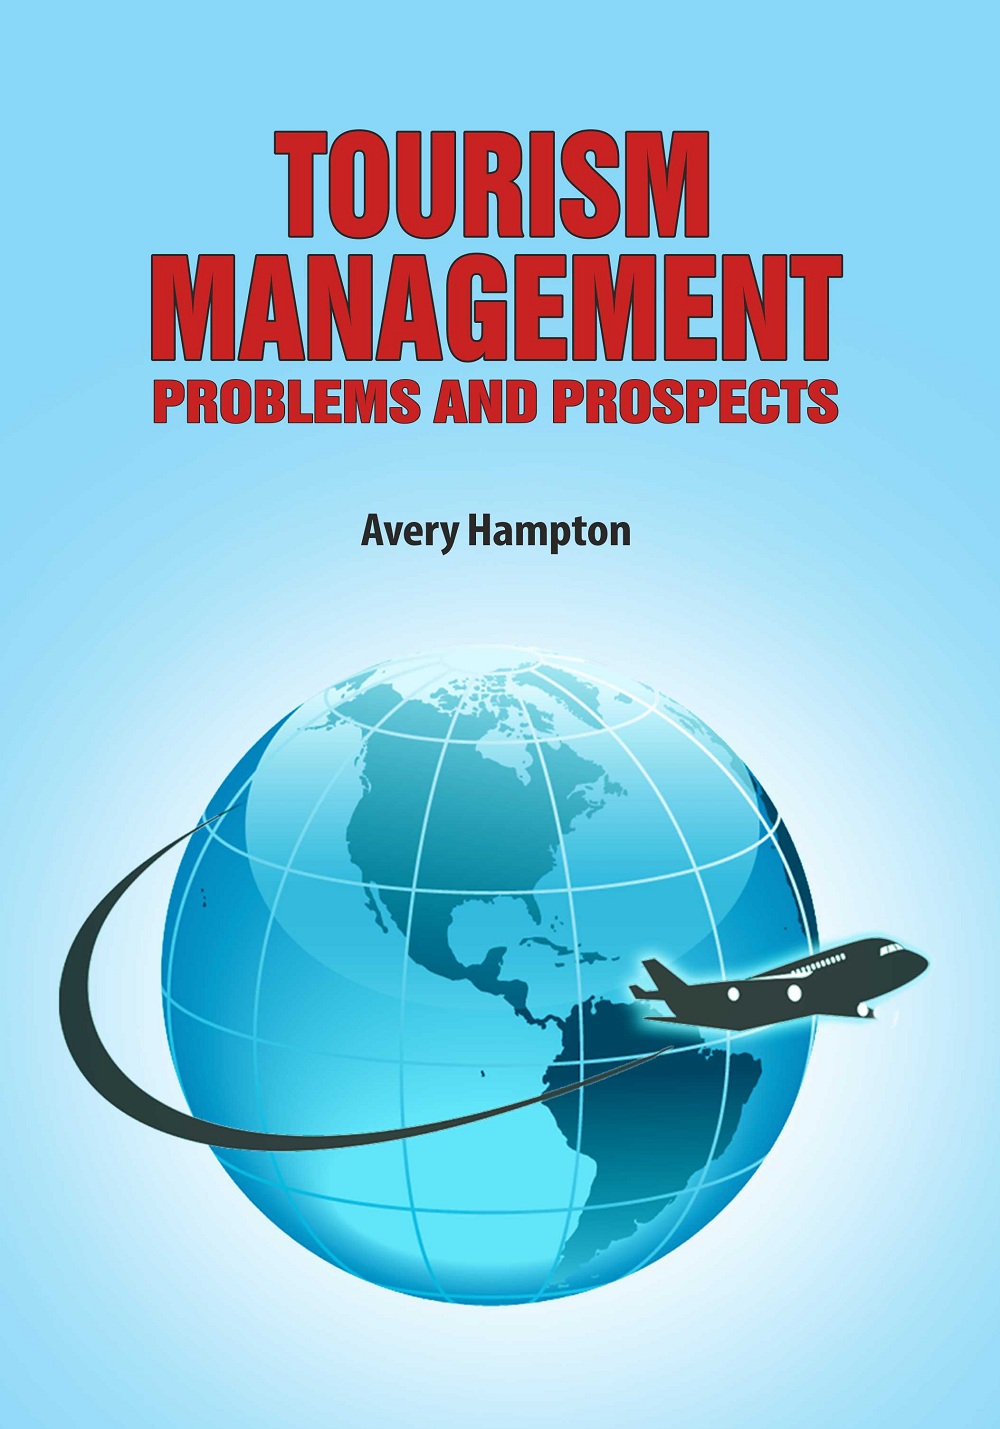 Tourism Management: Problems and Prospects